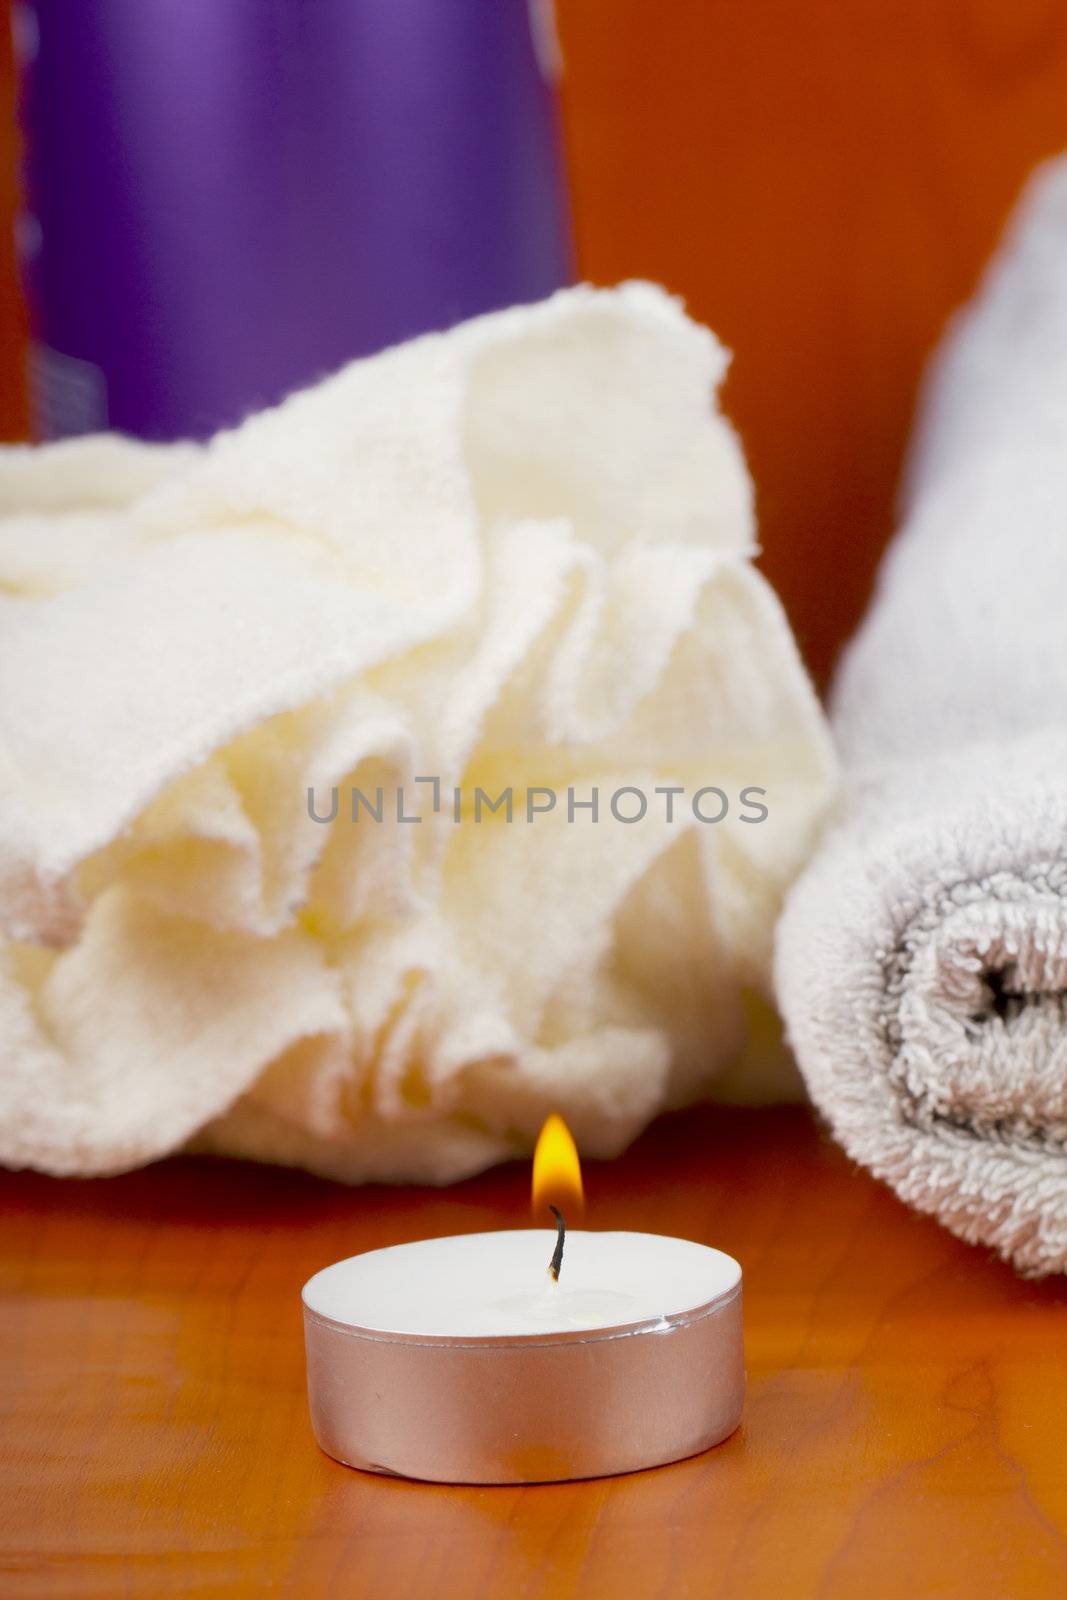 Candle, towels and other bath stuff over wooden background